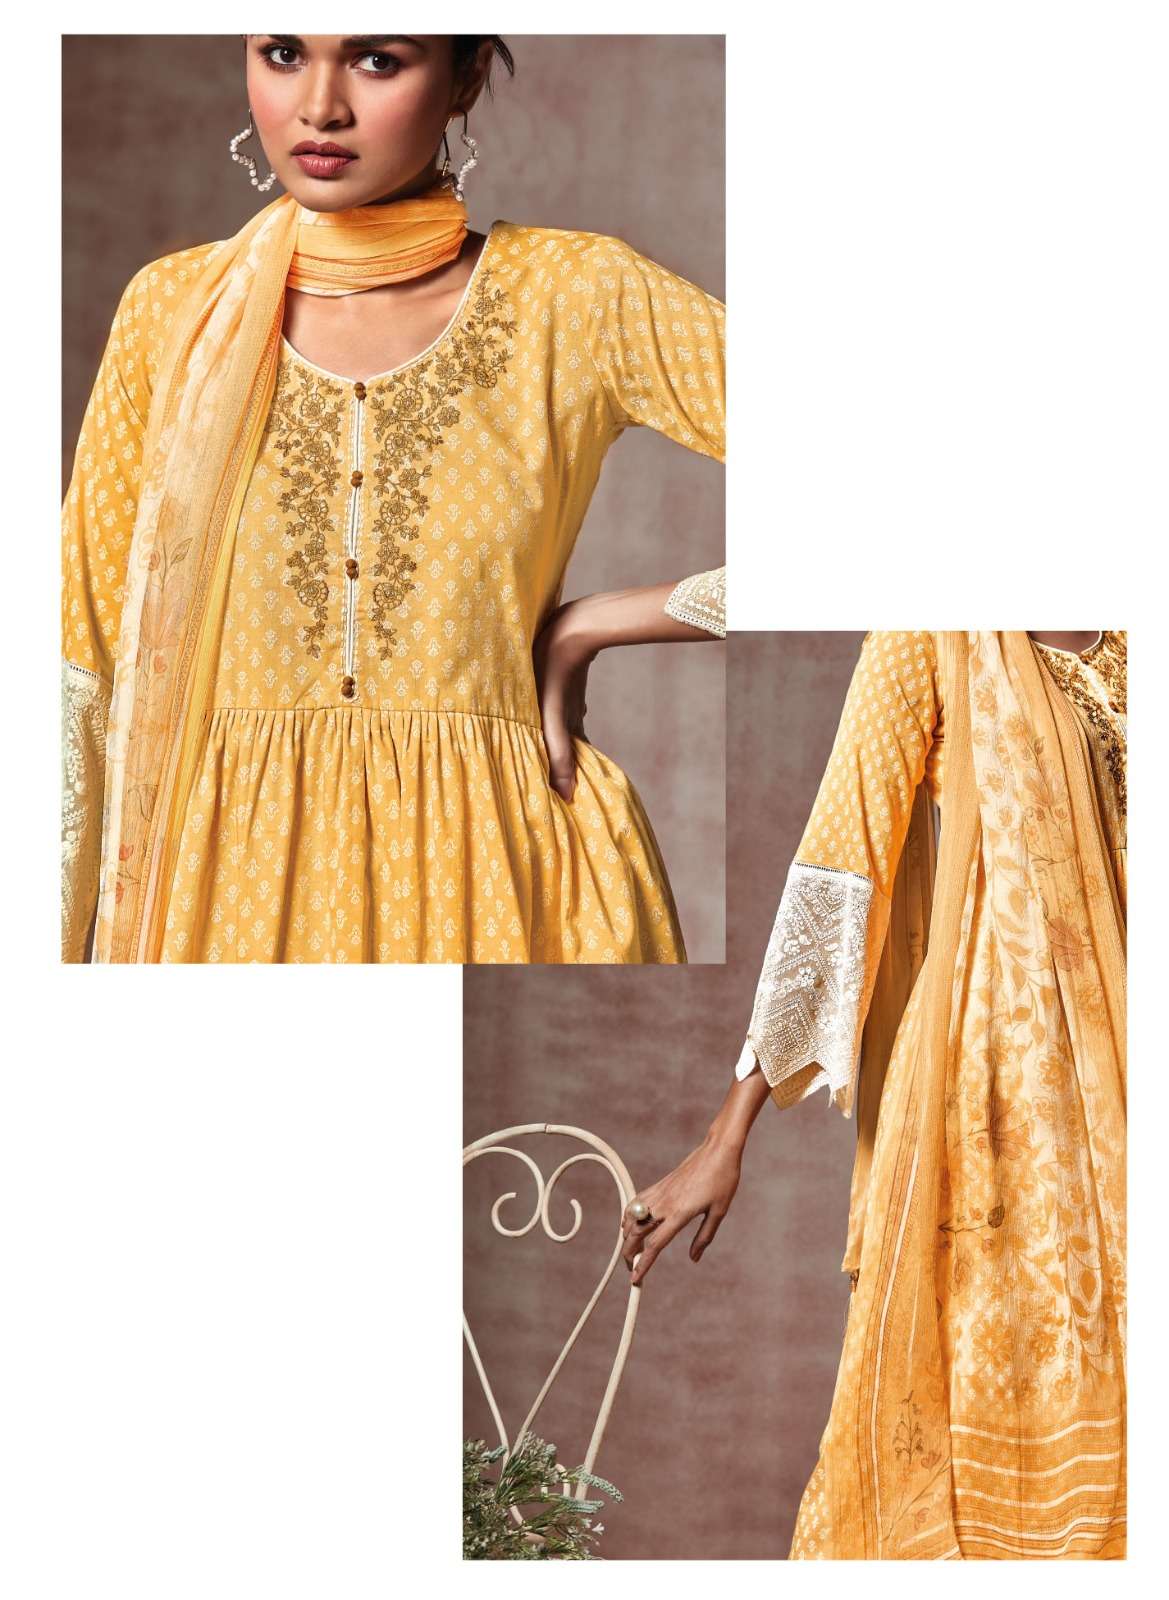 reyna endless summer vol-4 931-937 series exlusive designer top bottom with dupatta latest collection india